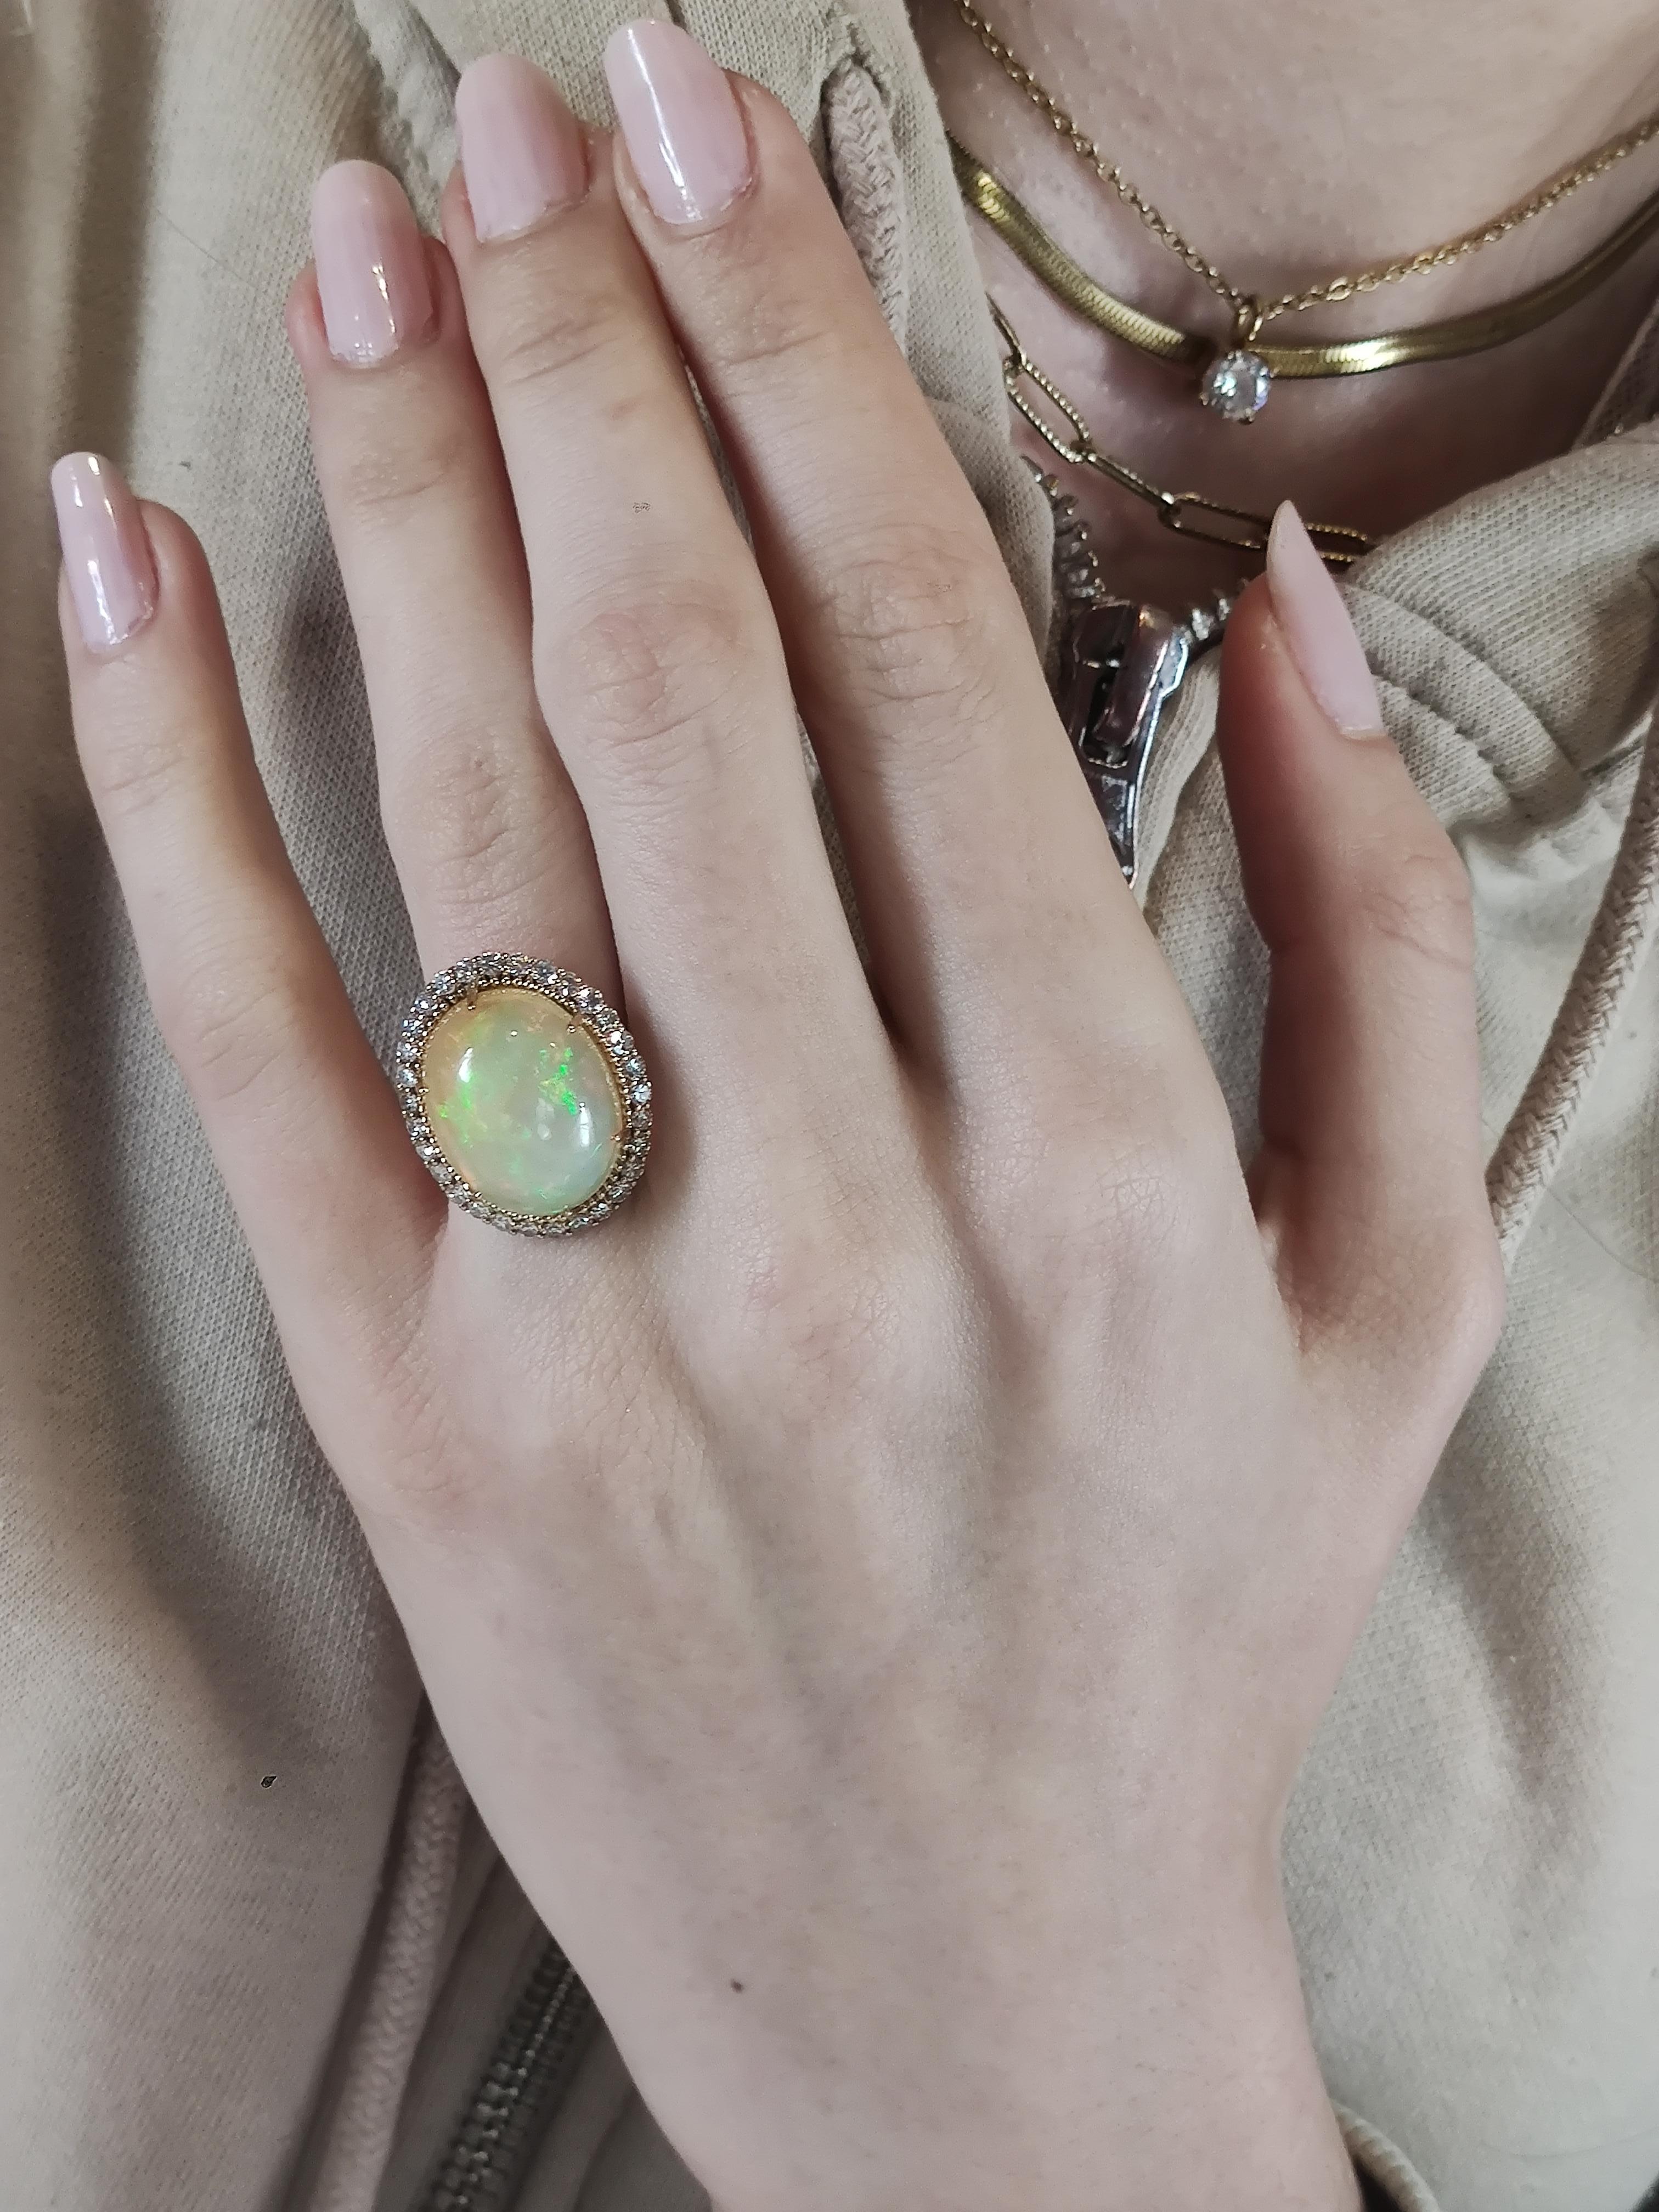 Discover our exquisite 14K Rose Gold Opal and Diamond Ring – a perfect choice for a woman's statement piece. Genuine, untreated opal, certified diamonds, and alluring details. Shop now for a touch of elegance!

TECHNICAL DETAIL:
SIZE:
To look at the